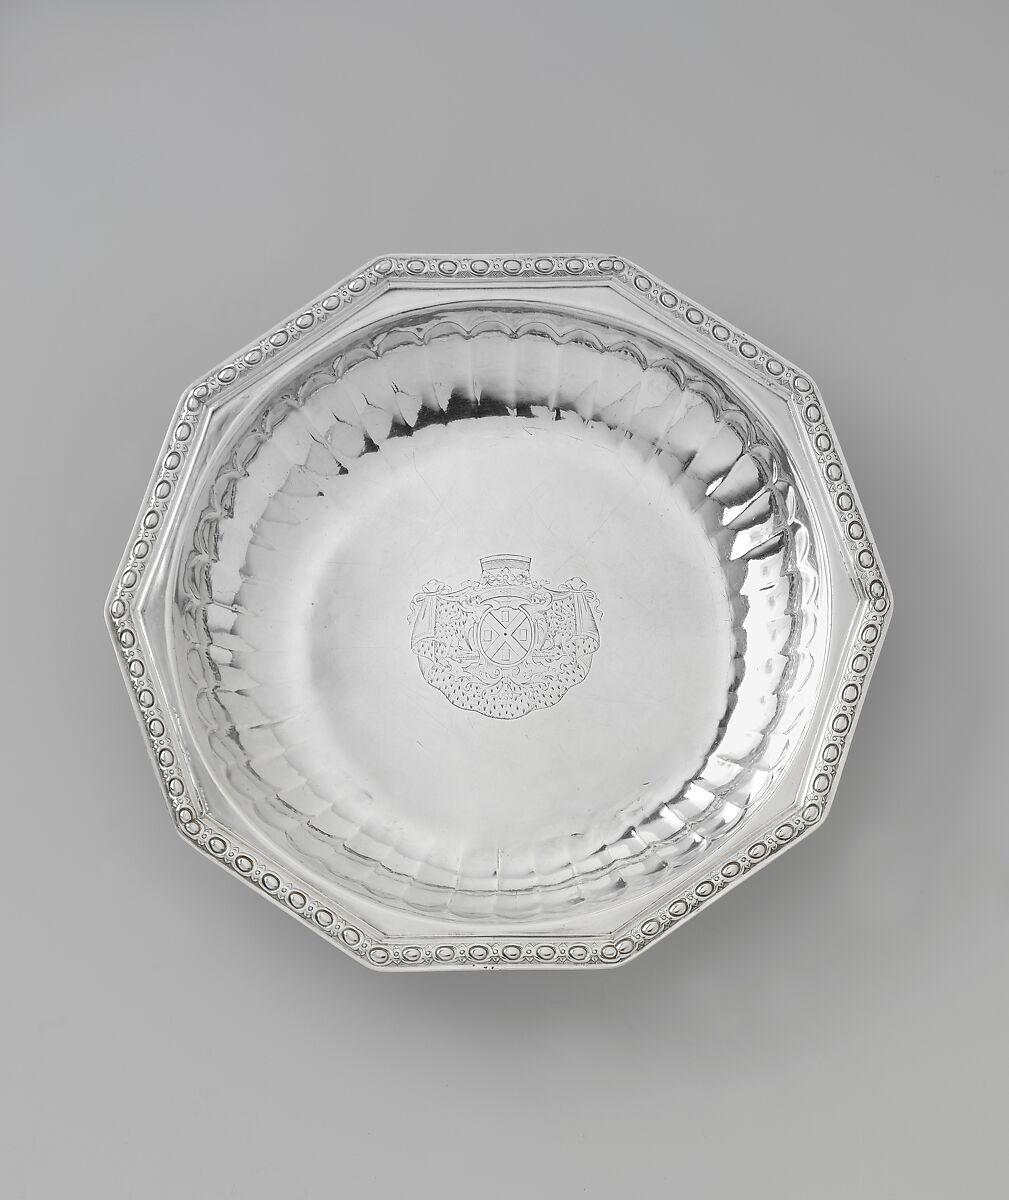 Dish (one of a pair), Jean-Baptiste I Buchet (master 1724, retired 1771) or, Silver, French, Rennes 